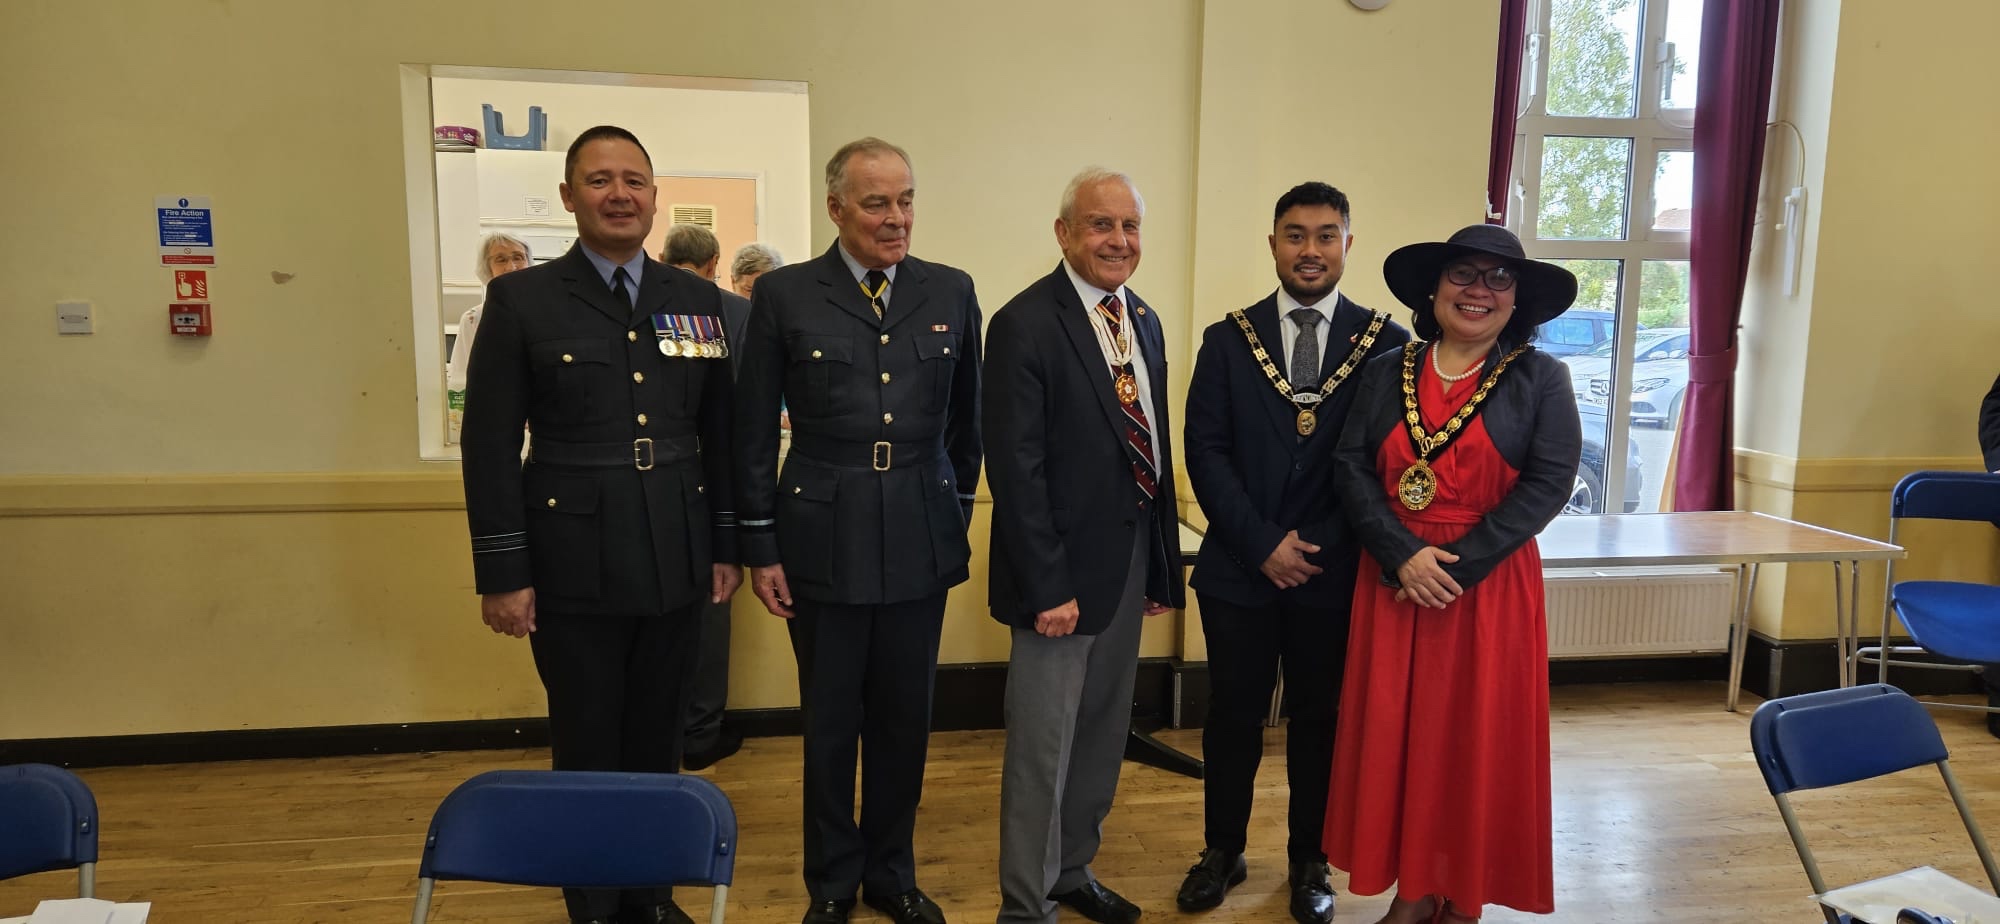 Royal Air Forces Association’s Service of Thanksgiving in Stevenage